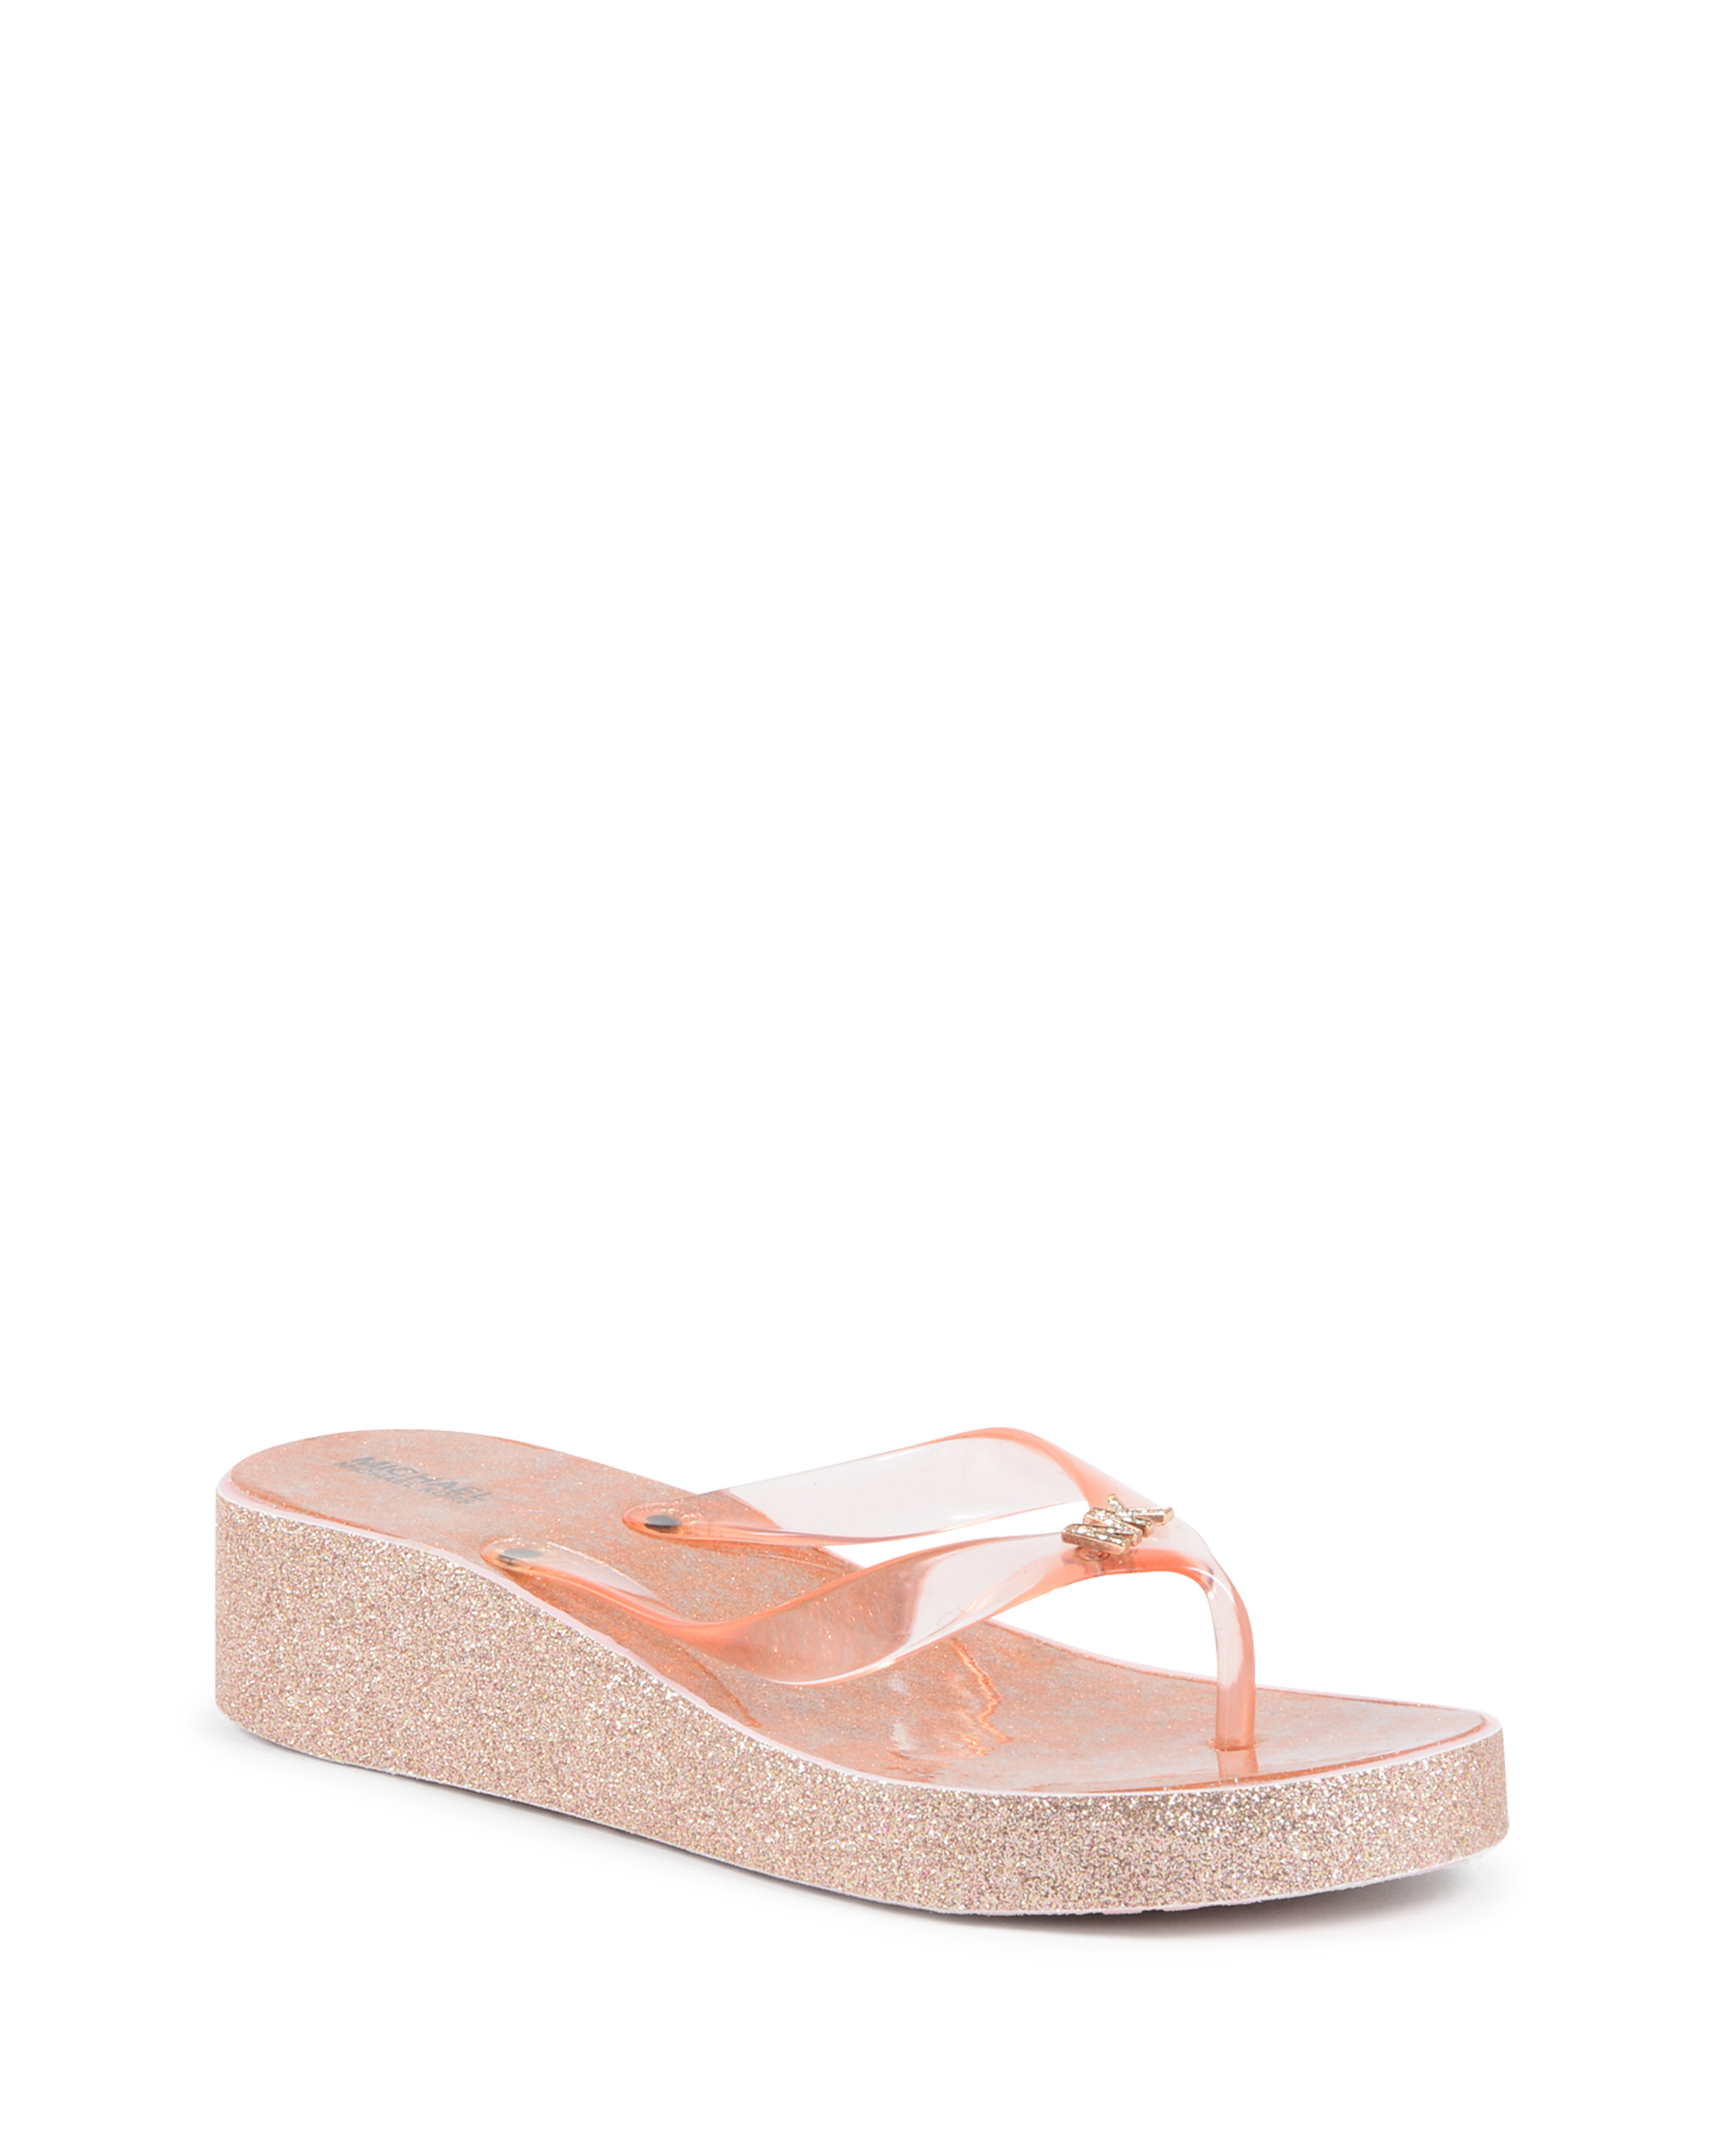 ZIA GAGE KILEY ROSE GOLD